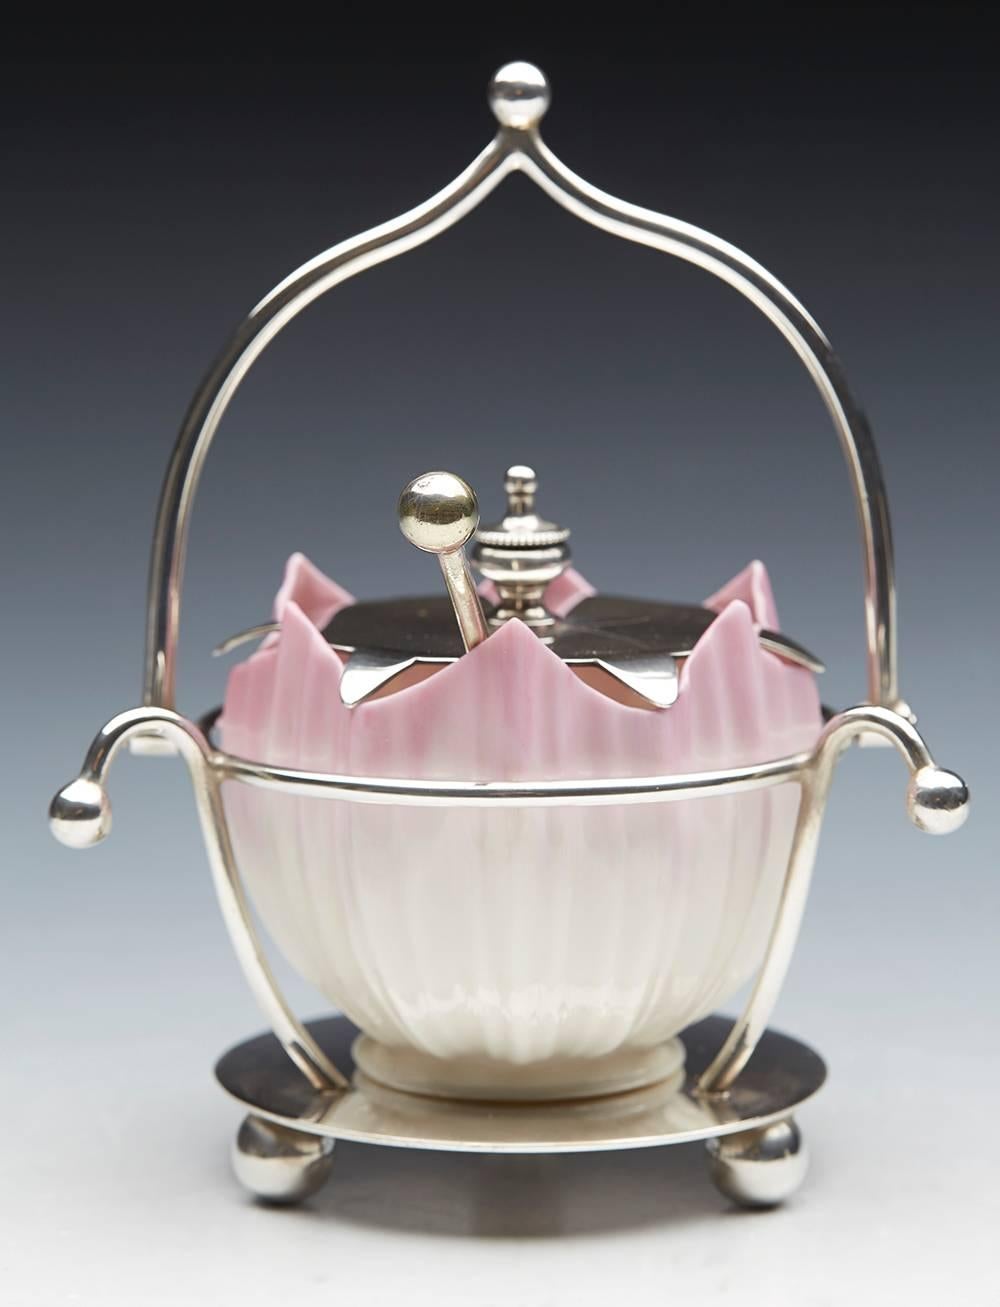 An Aesthetic Movement Grainger Worcester sucrier with a fitted silver plated swing handle Stand dated 1899. The very finely made porcelain sucrier has a ribbed flower bud shaped body applied with blush pink finish. The container sits neatly within a